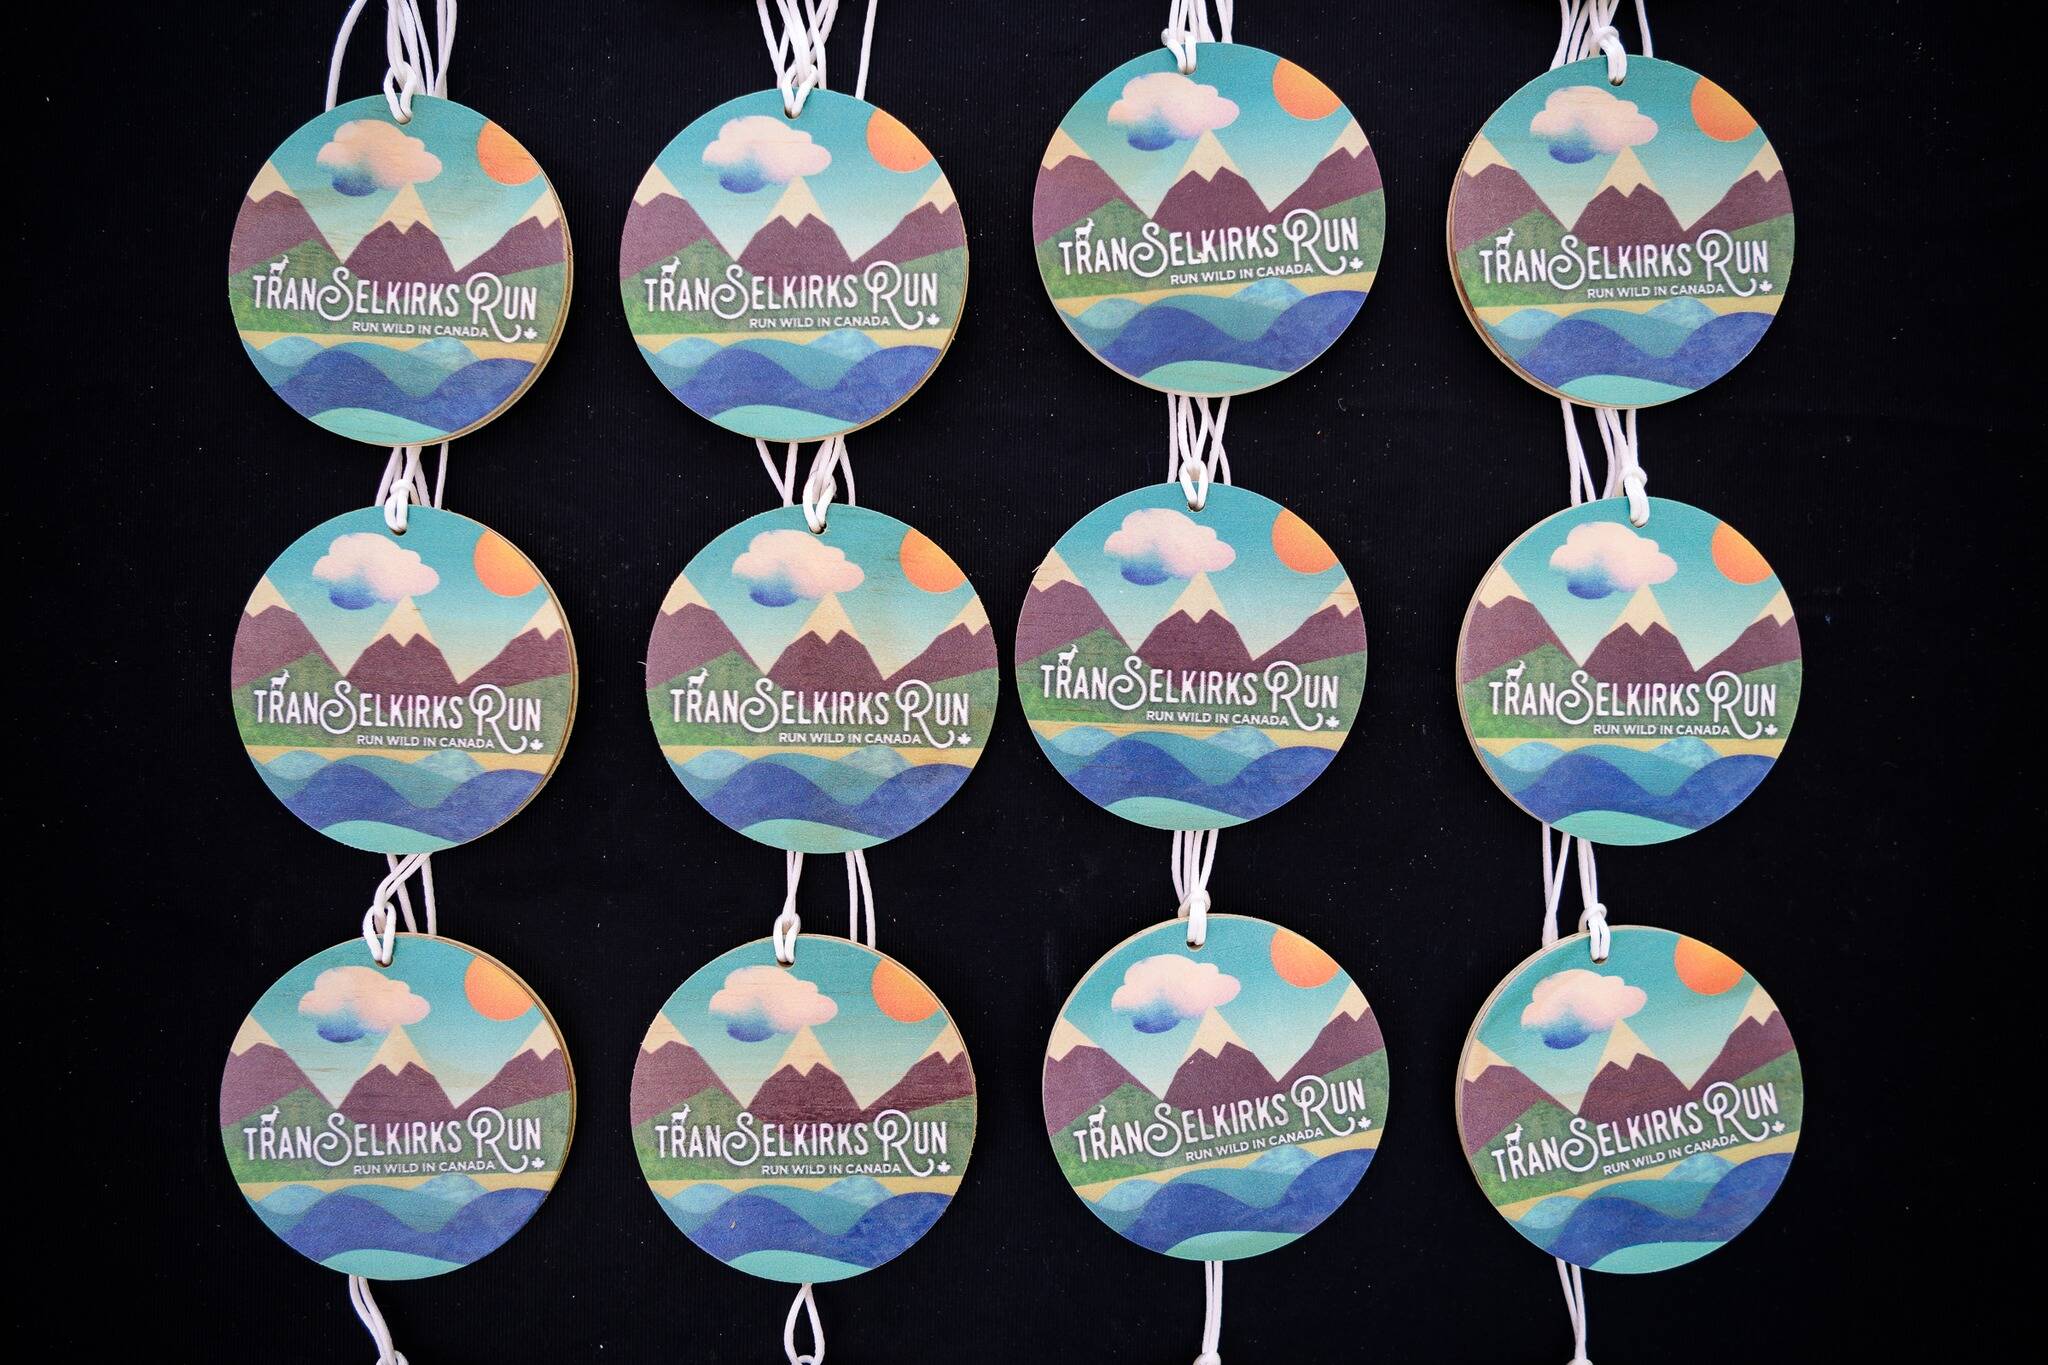 The medals for the TranSelkirks Run. (Bruno Long)